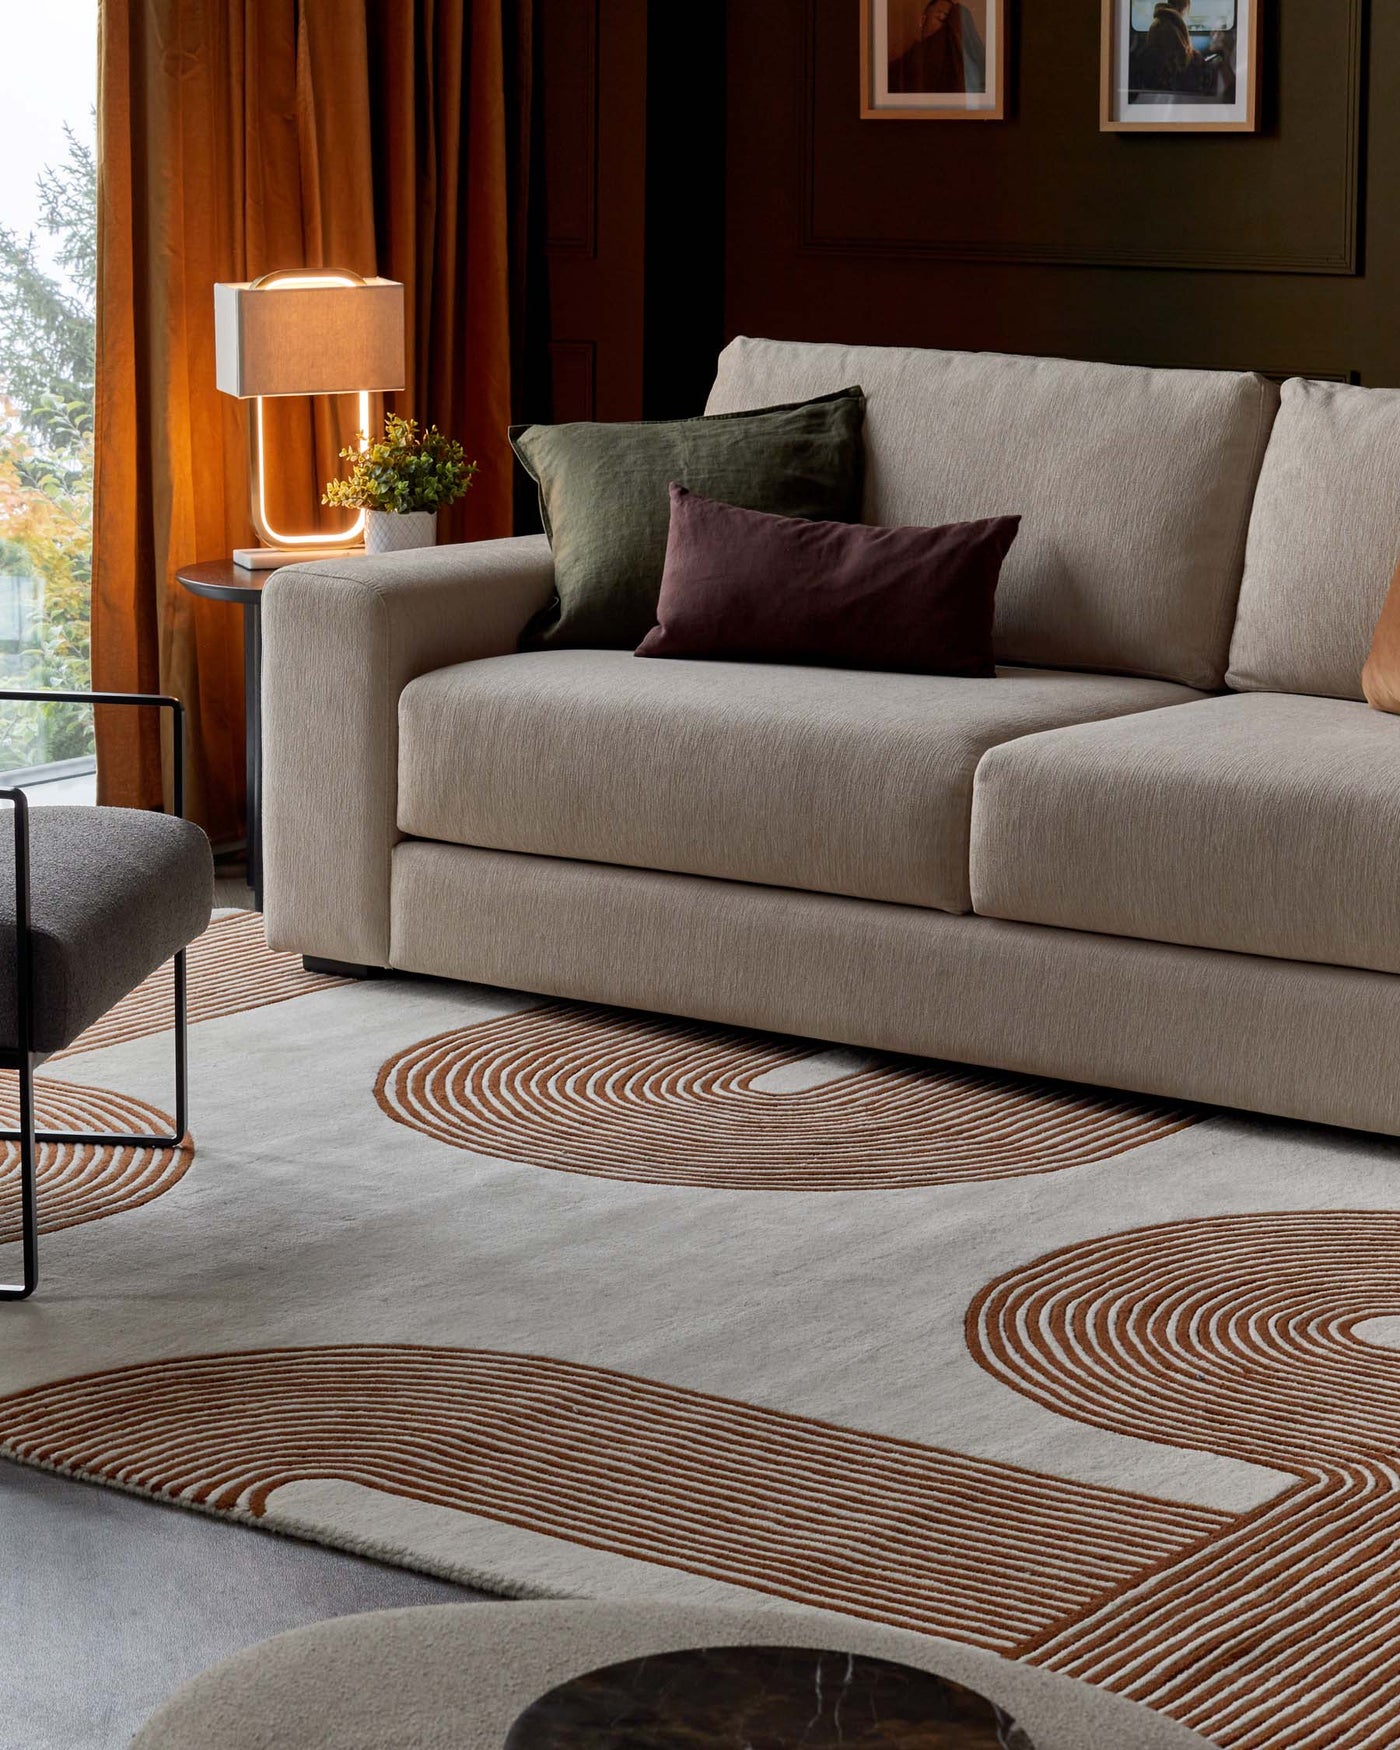 Taupe upholstered three-seat sofa with plush cushions, accompanied by a dark grey ottoman, resting on a contemporary white area rug with abstract caramel brown swirl patterns. To the left, a sleek side table supports a modern geometric-shaped table lamp.